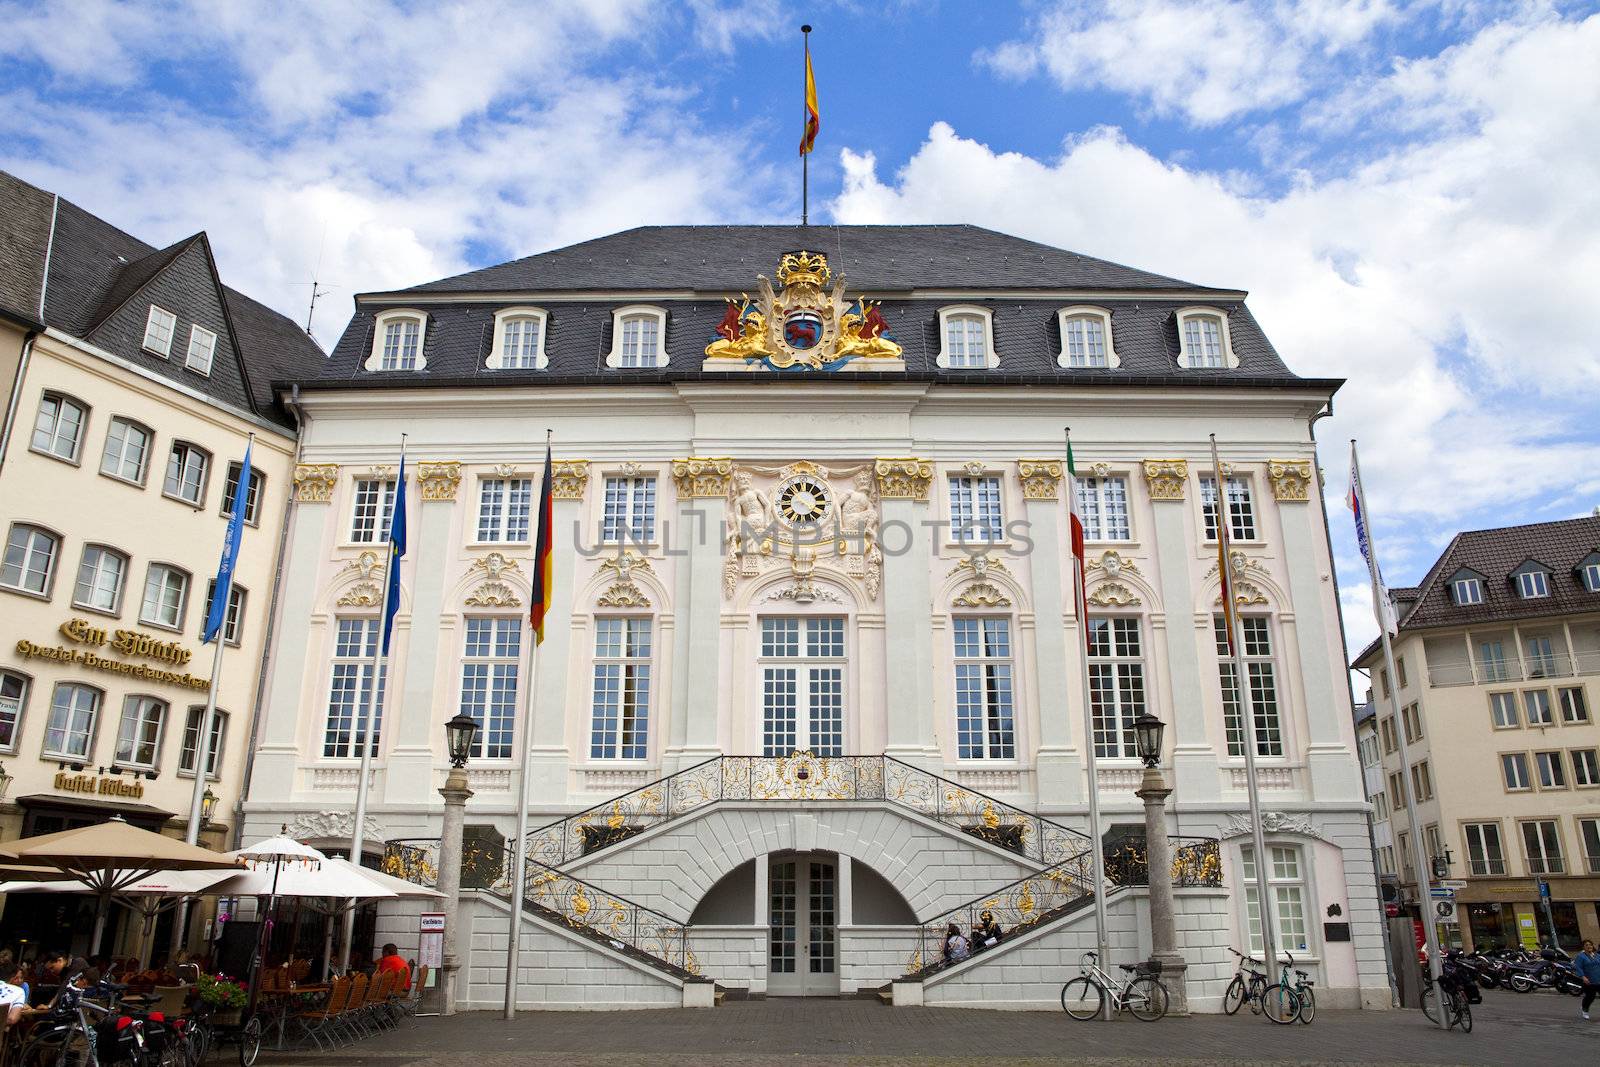 The historic Town Hall (Rathaus) of Bonn in Germany.  View from the Market Square.